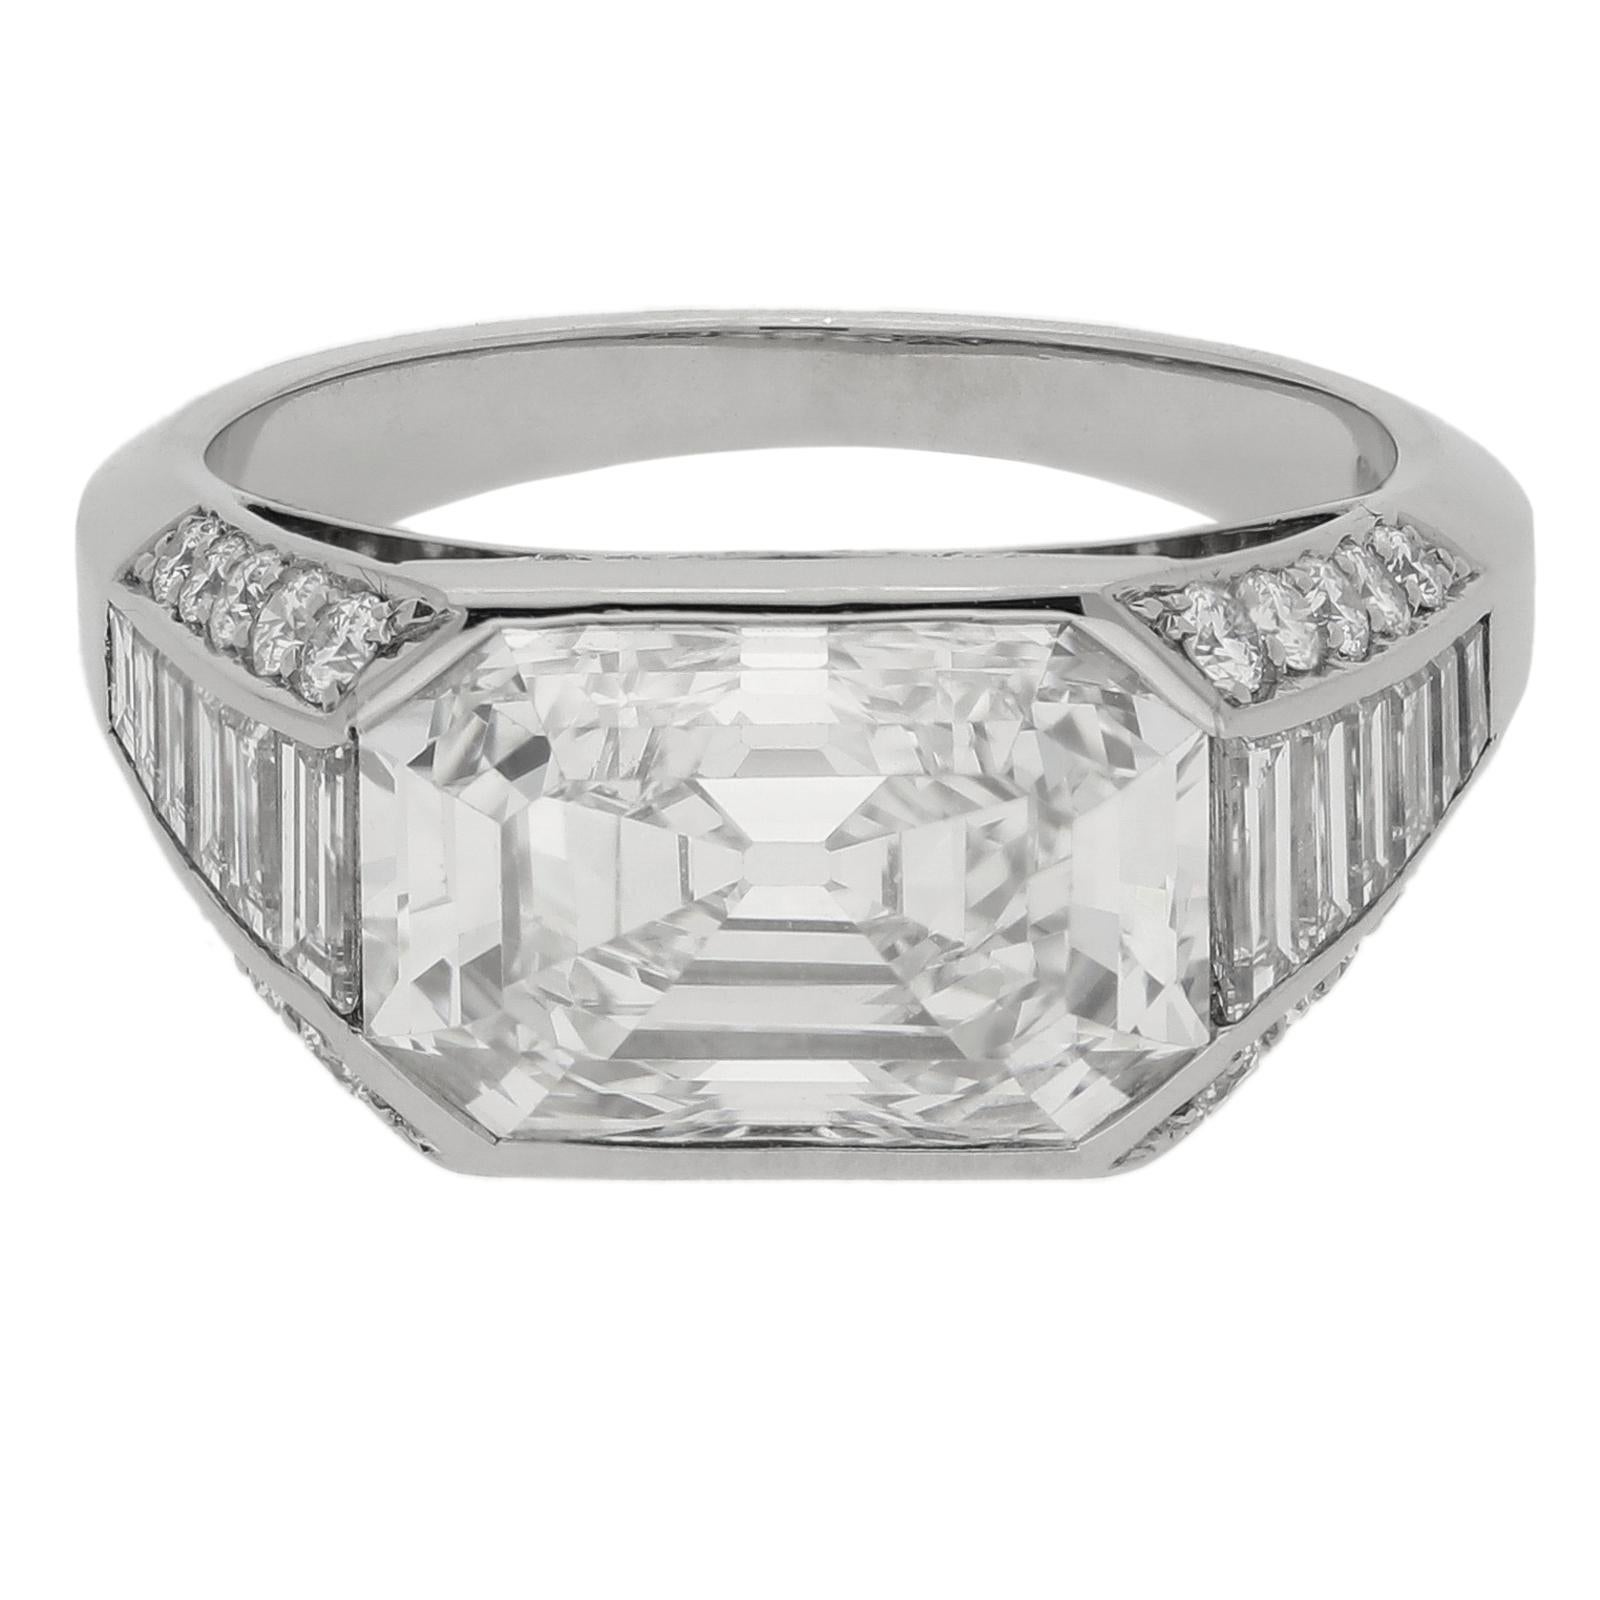 Description
A stunning geometric diamond and platinum ring by Hancocks, centred with a lovely rectangular step cut diamond with canted corners weighing 4.25cts and of G colour and VS1 clarity, set horizontally in a rub over style setting between